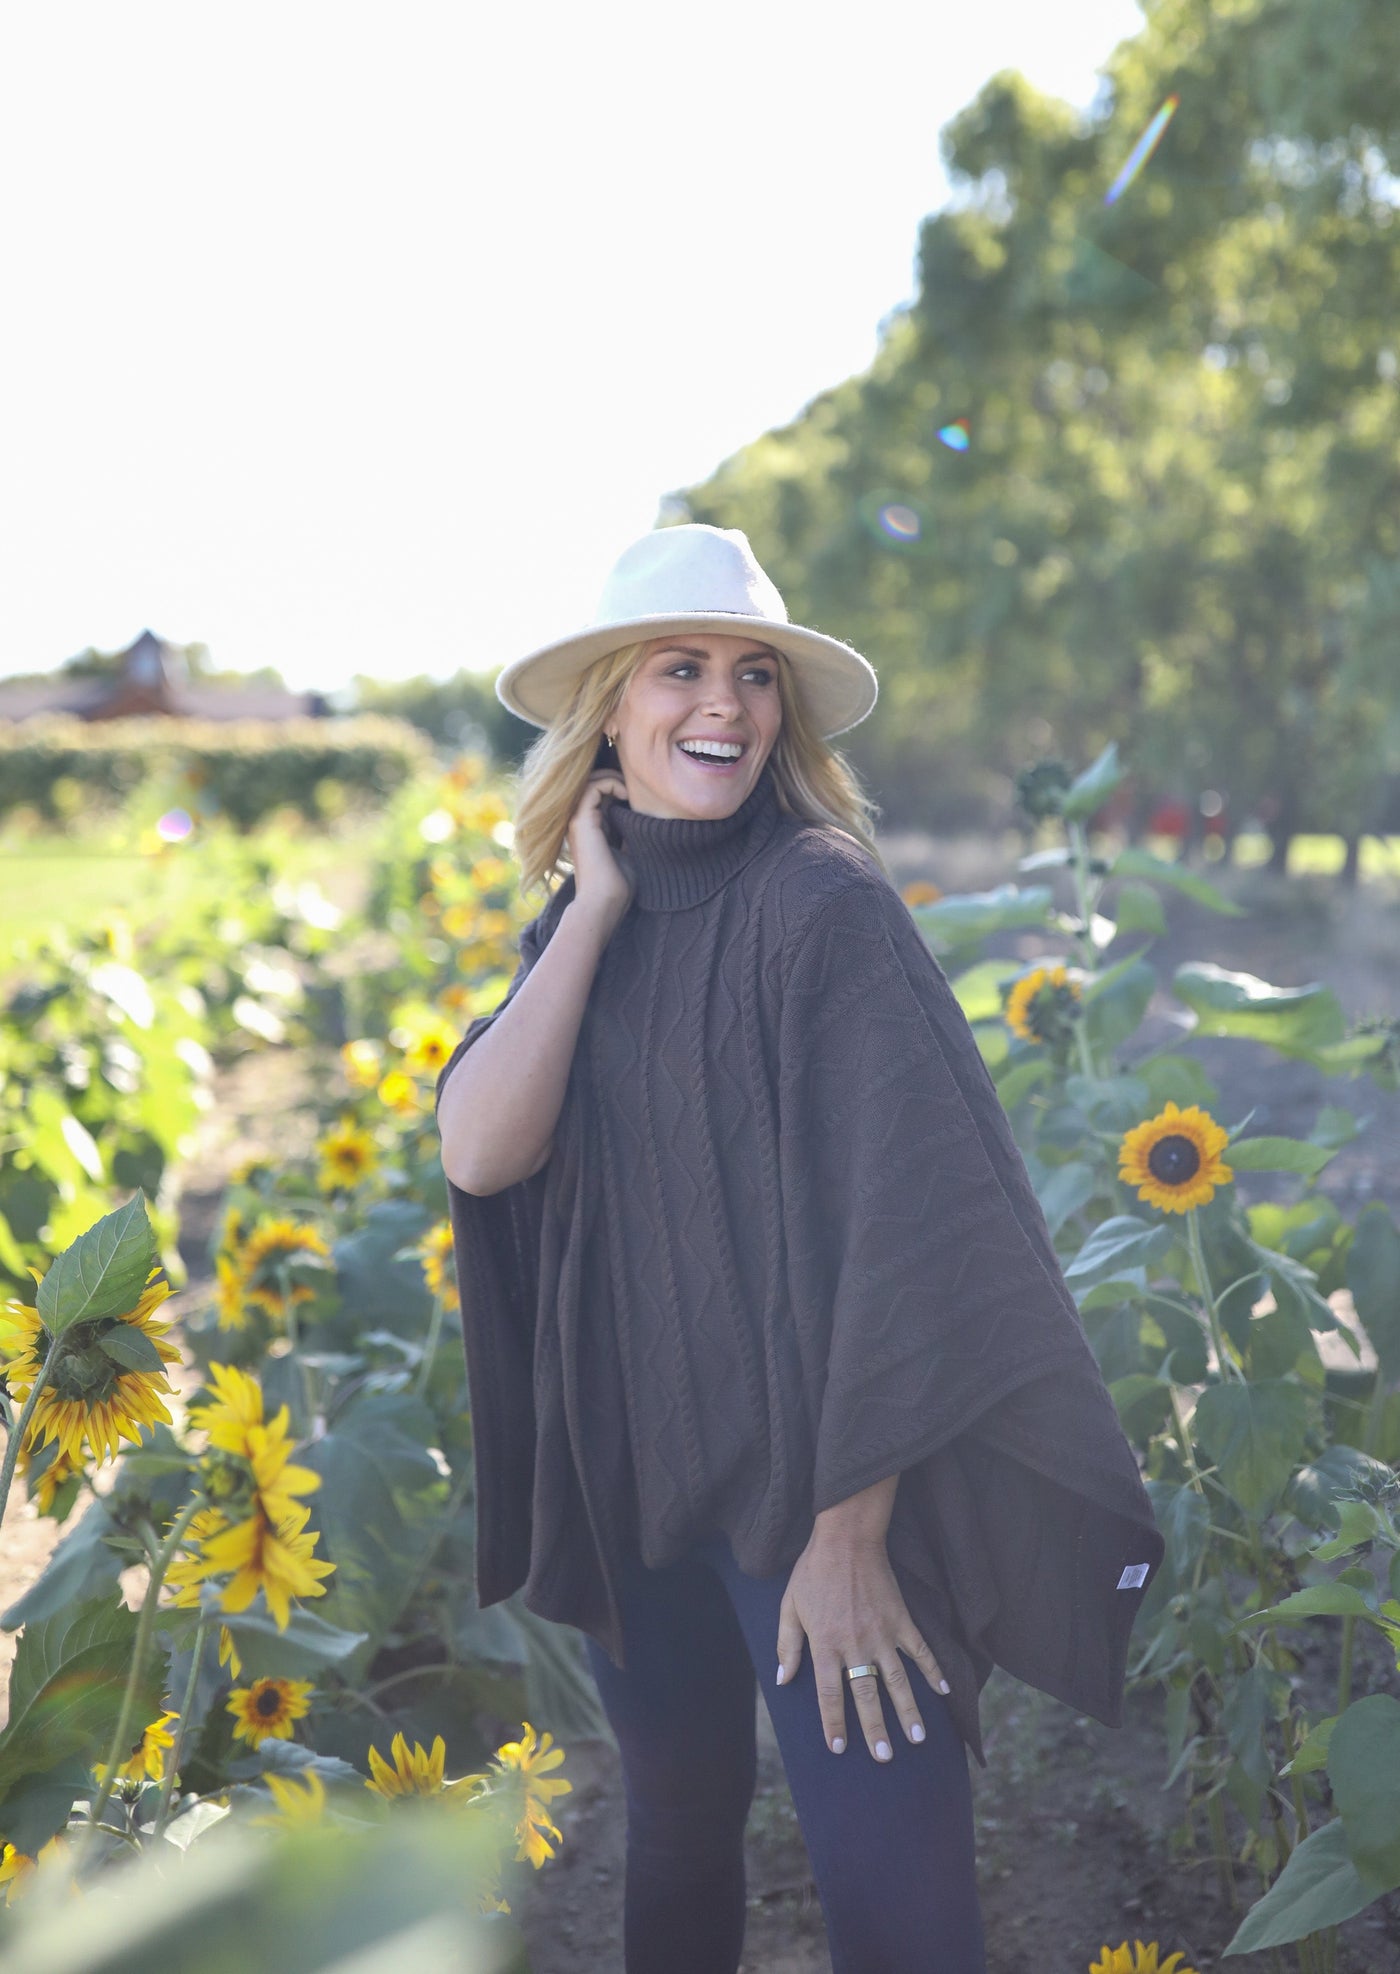 The Perry Poncho | Brazilian Nut